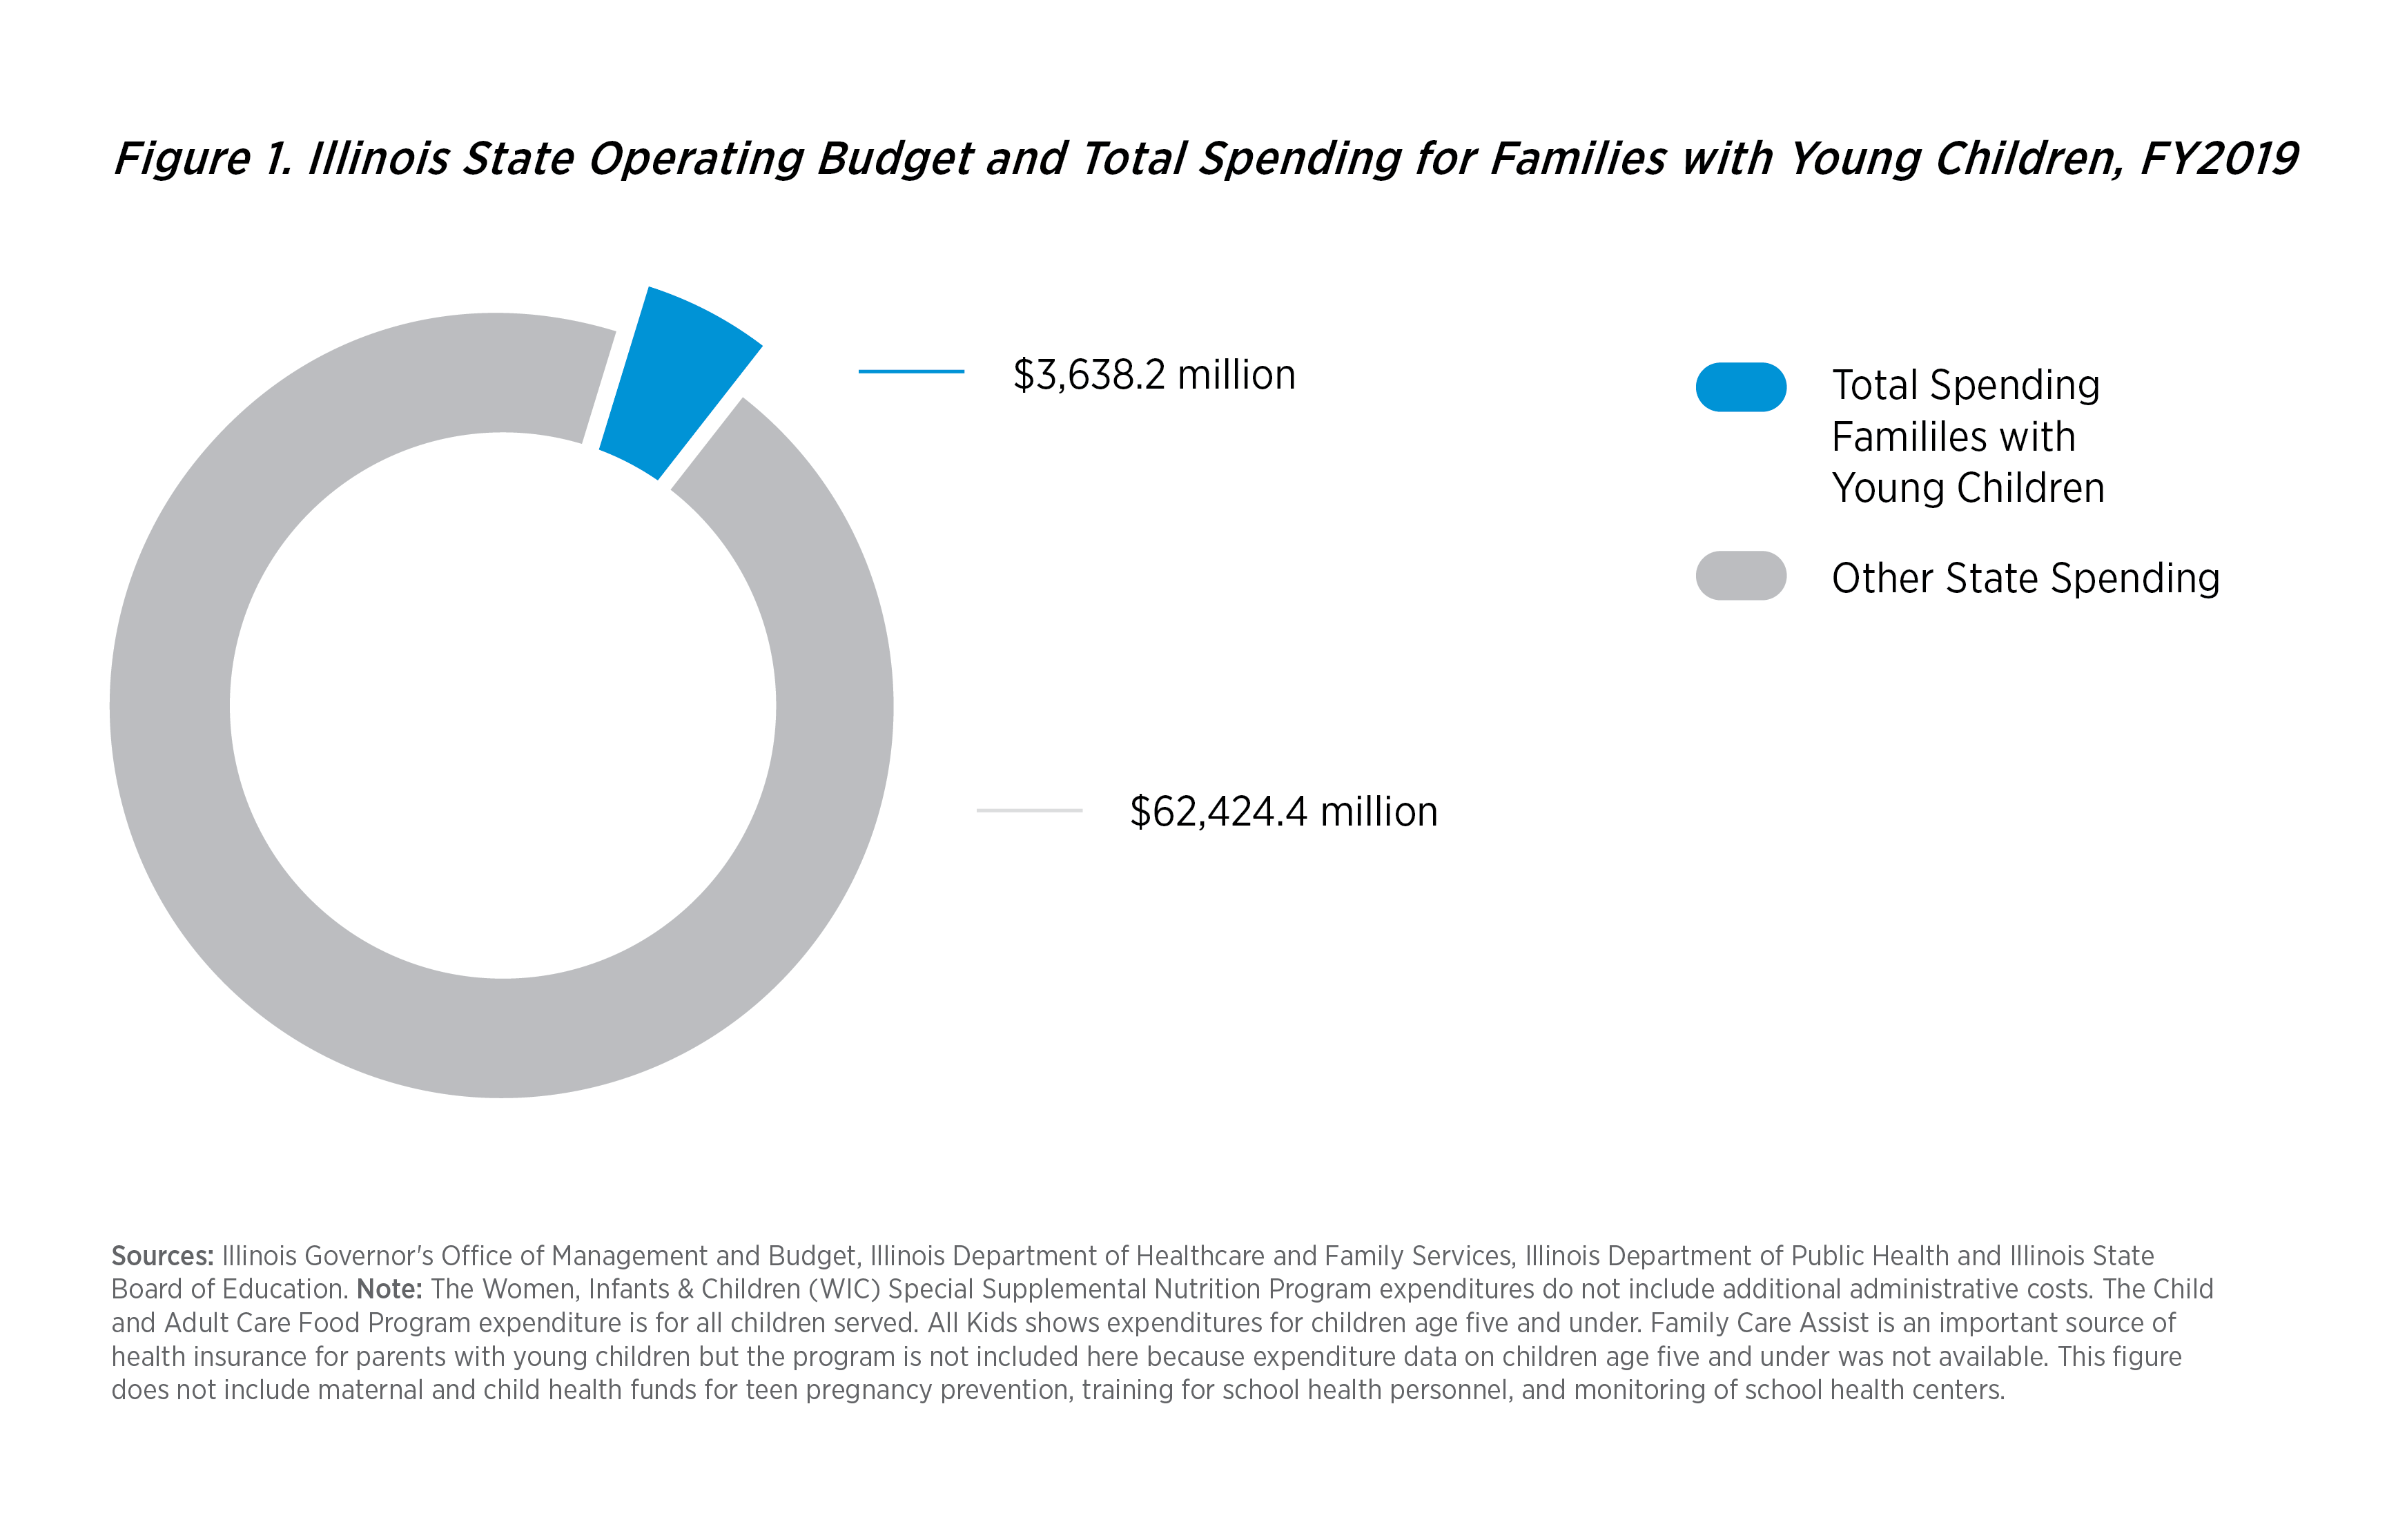 Illinois State Operating Budget and Total Spending for Families with Young Children, FY2019